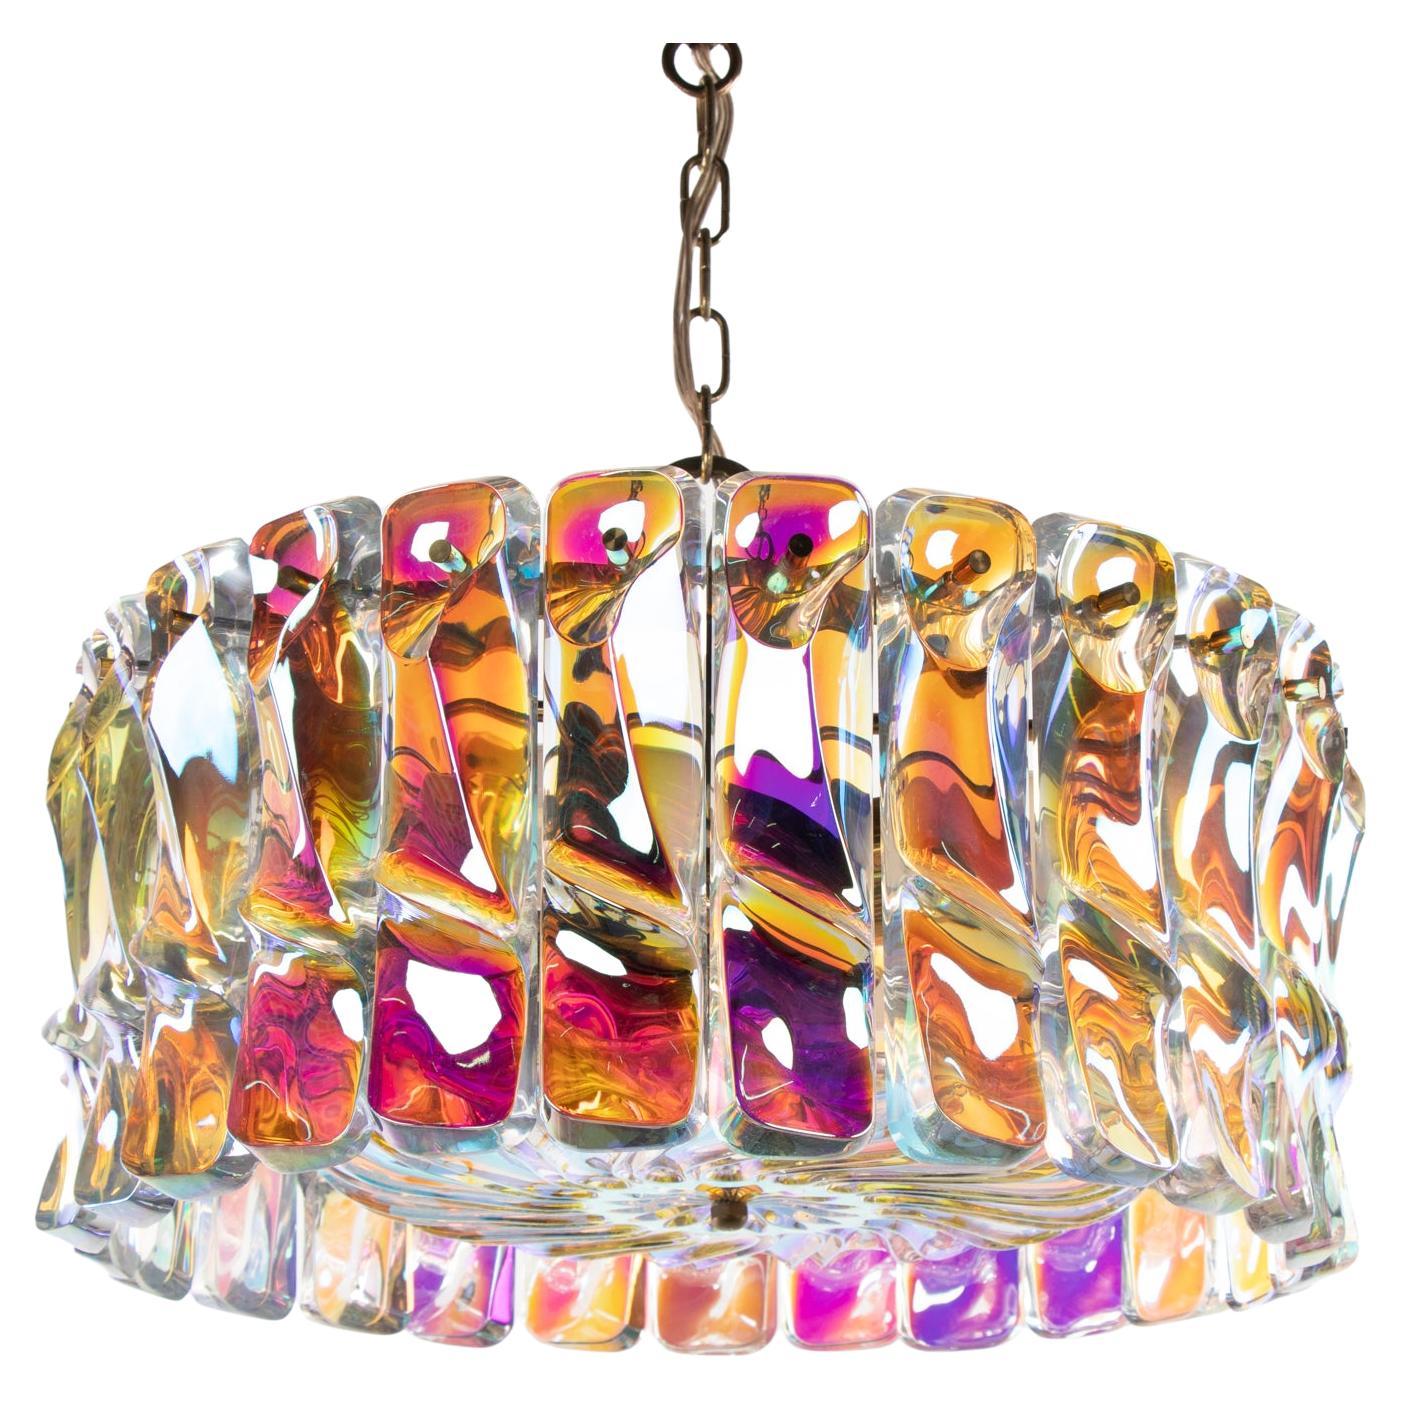 1960 Italy Glamorous Chandelier with Iridescent Venini Murano Glass & Brass For Sale